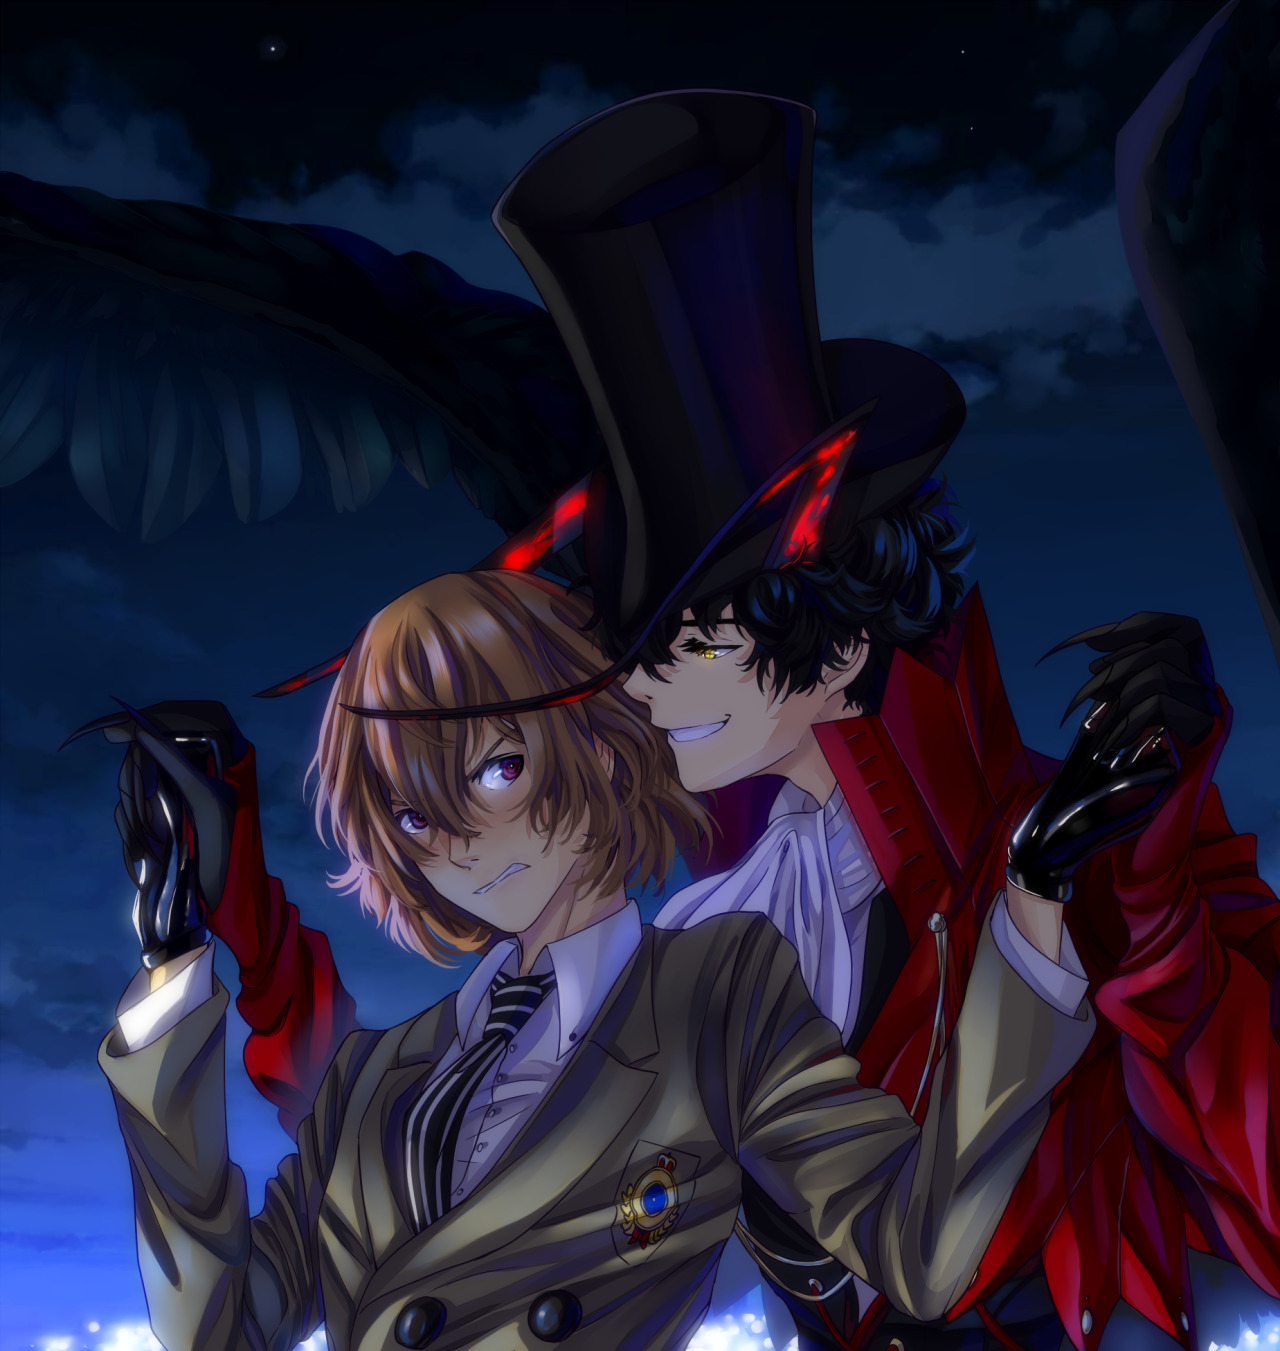 A romantic view just for you, detective  #shuake#akeshu#persona 5#goro akechi #persona 5 protagonist  #persona 5 arsene #arsene#akira kurusu#ren amamiya #yes i did spend my vacation watching ghibli films  #and thinking about them like this made me howl ;)  #last post of the year yeahh #my art